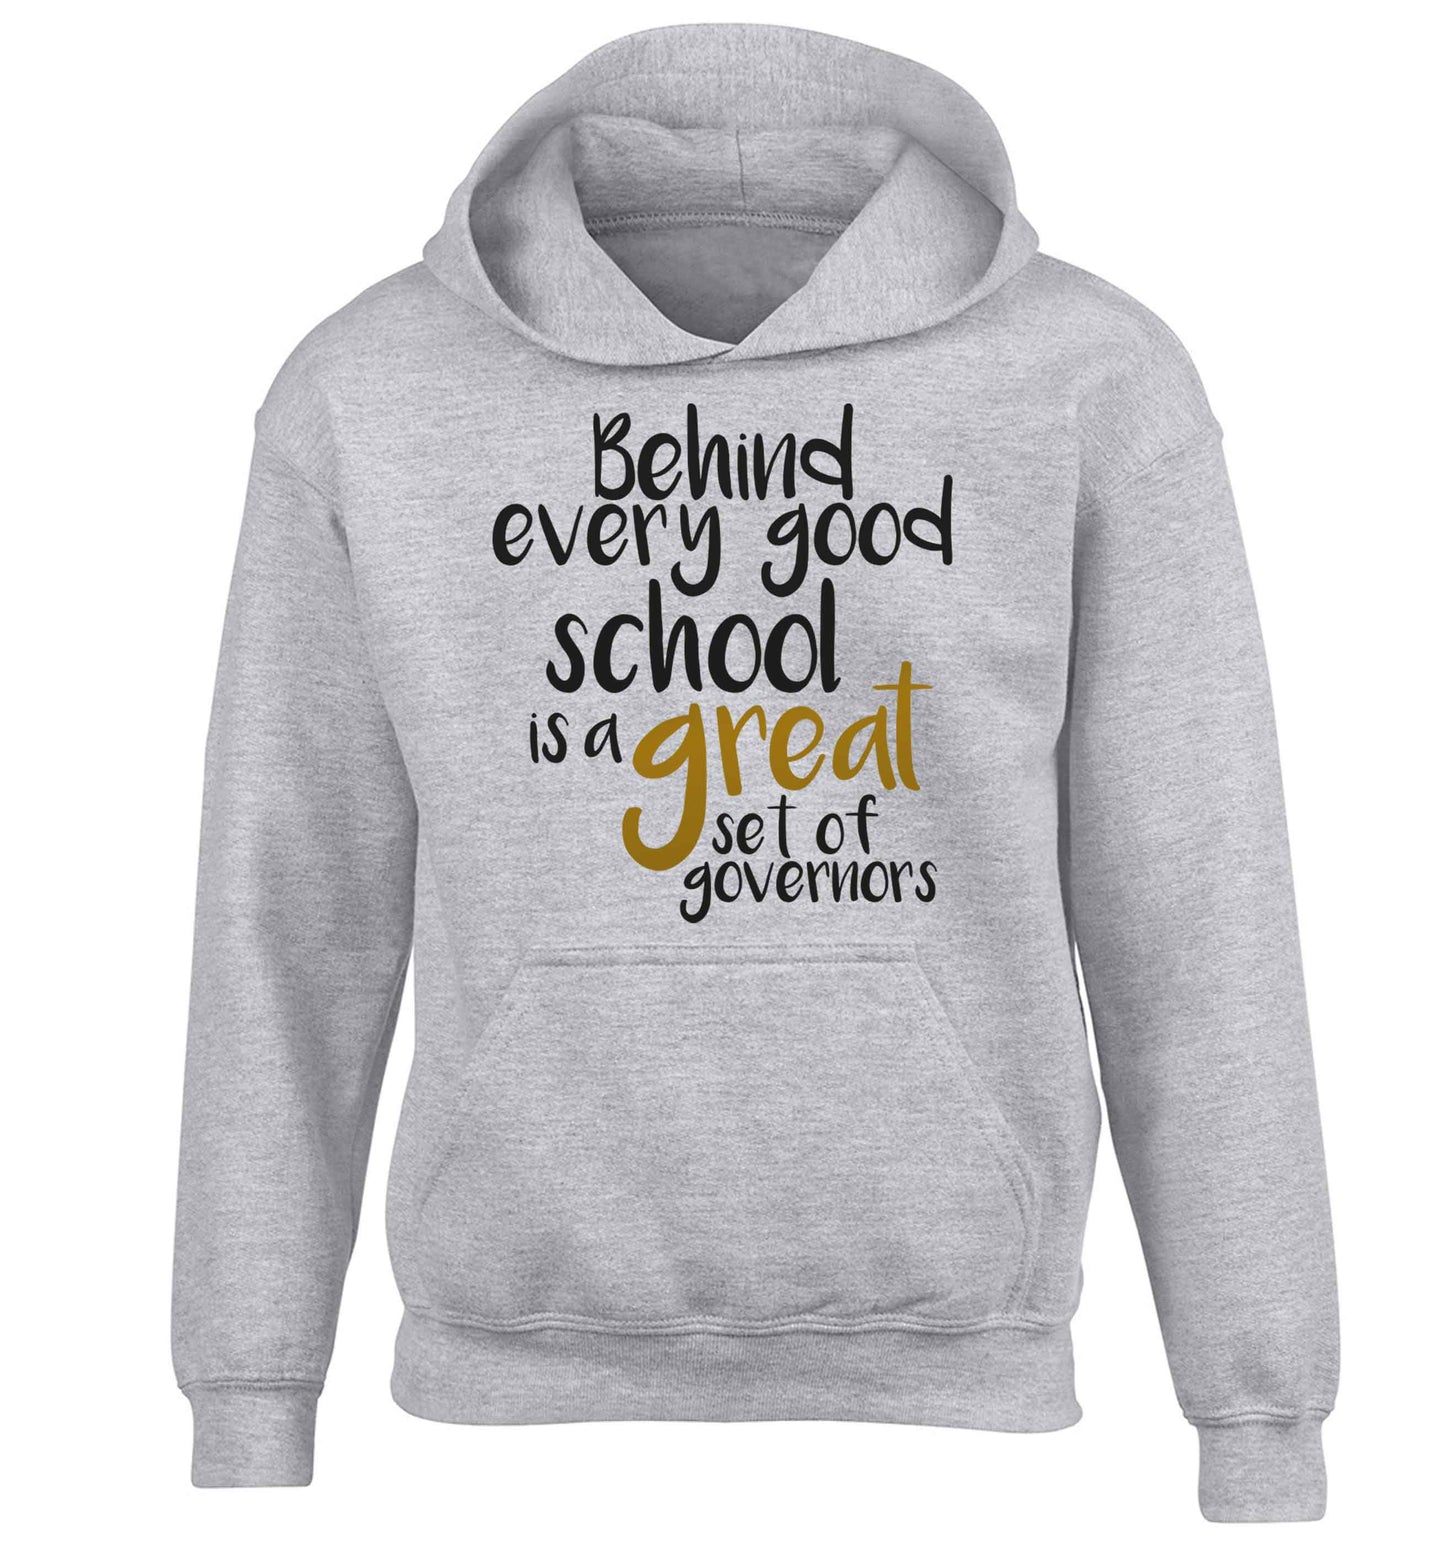 Behind every good school is a great set of governors children's grey hoodie 12-13 Years